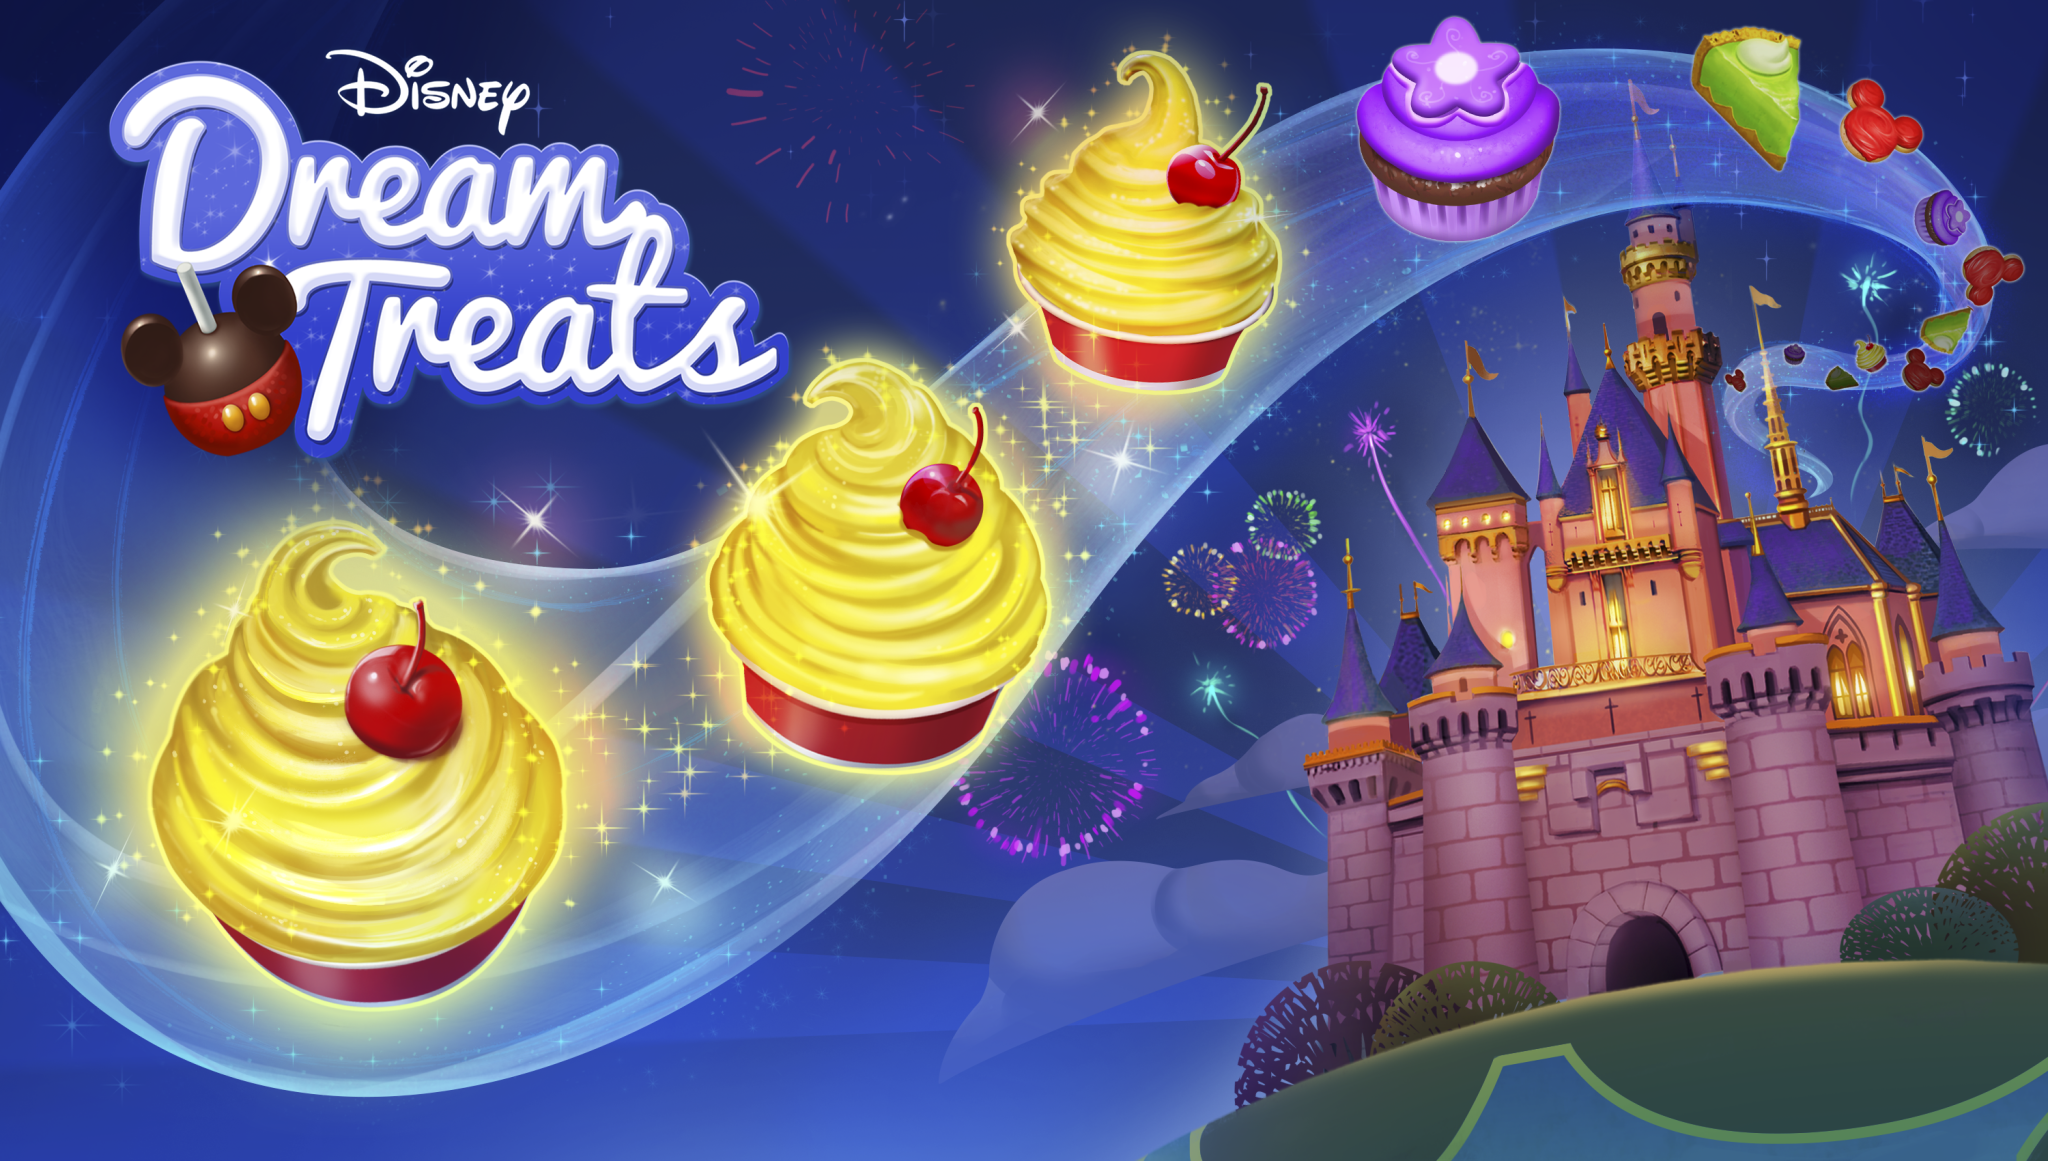 Treat Yourself to a Dream Tour of Restaurants in Disney Parks and Resorts around the world with Disney Dream Treats